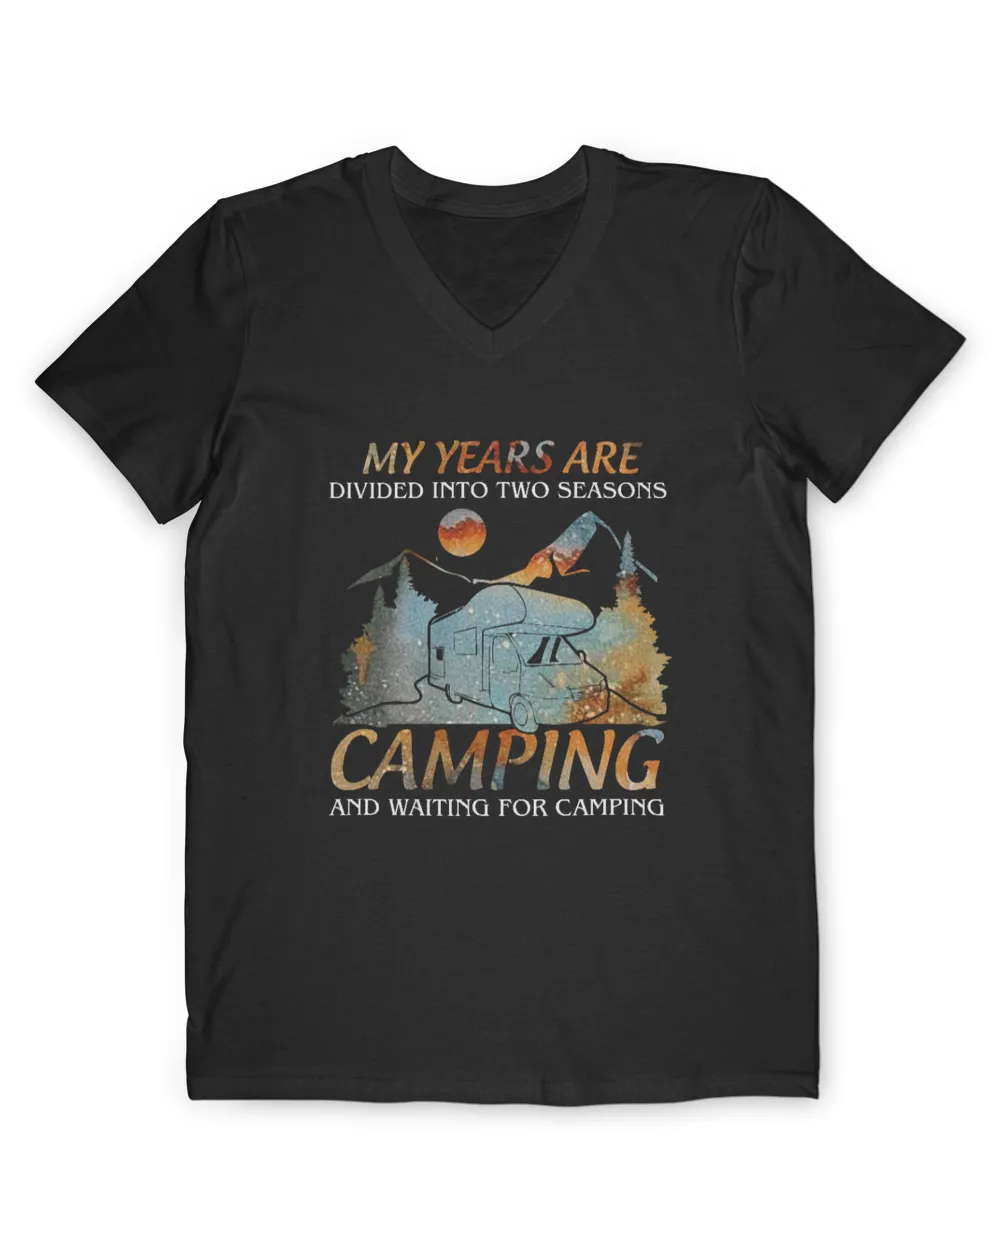 MY YEARS ARE DIVIDED INTO TWO SEASONS CAMPING AND WAITING FOR CAMPING